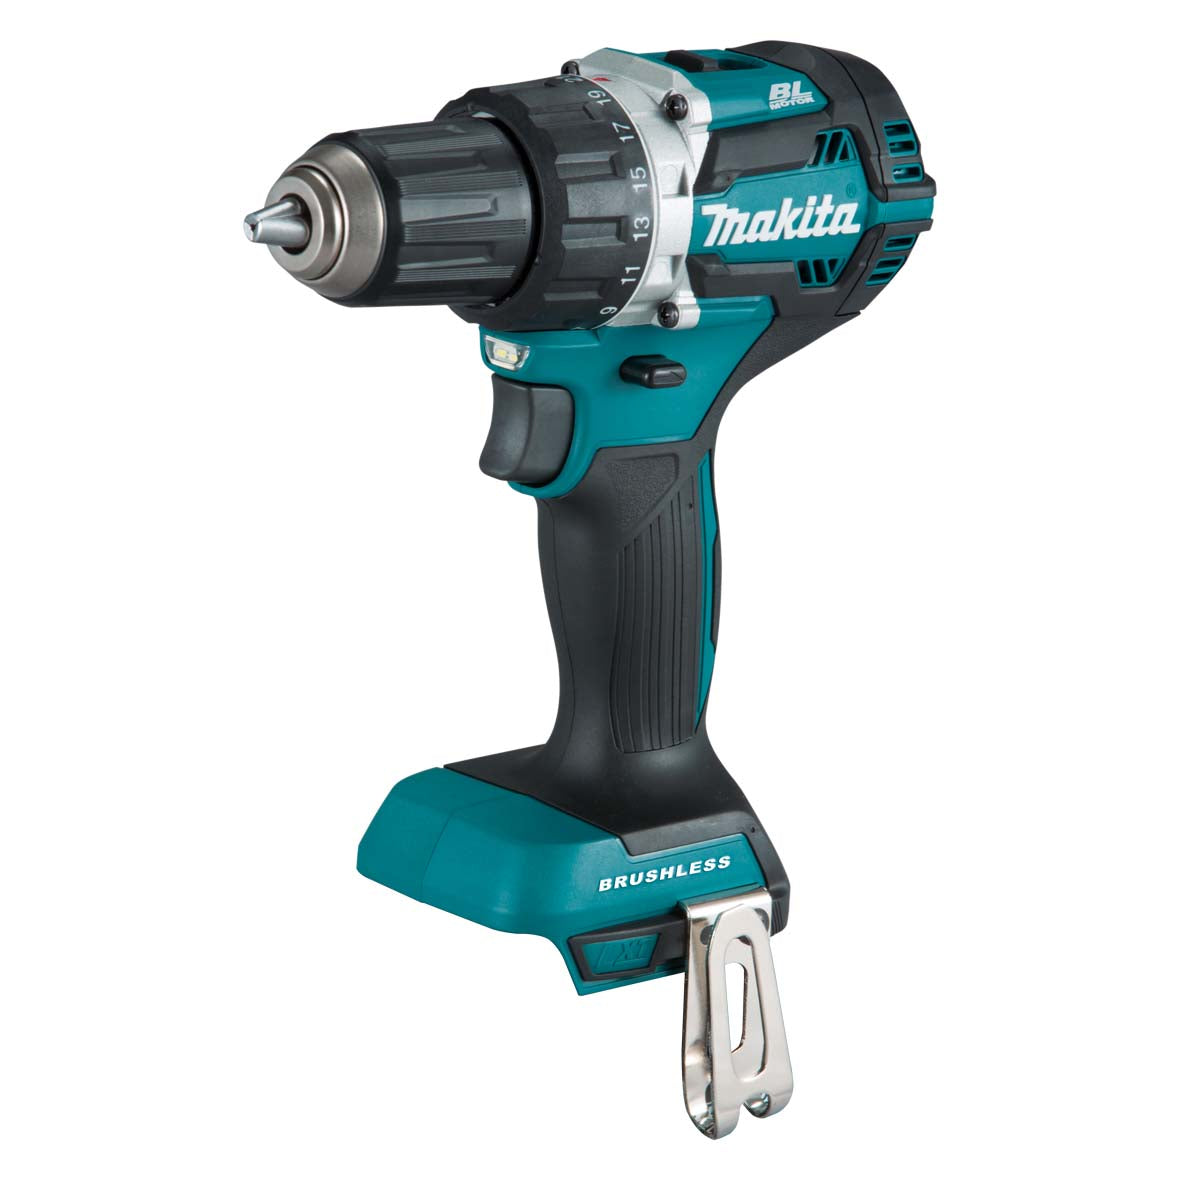 18V Brushless Heavy Duty Compact Driver Drill Bare (Tool Only) DDF484Z by Makita